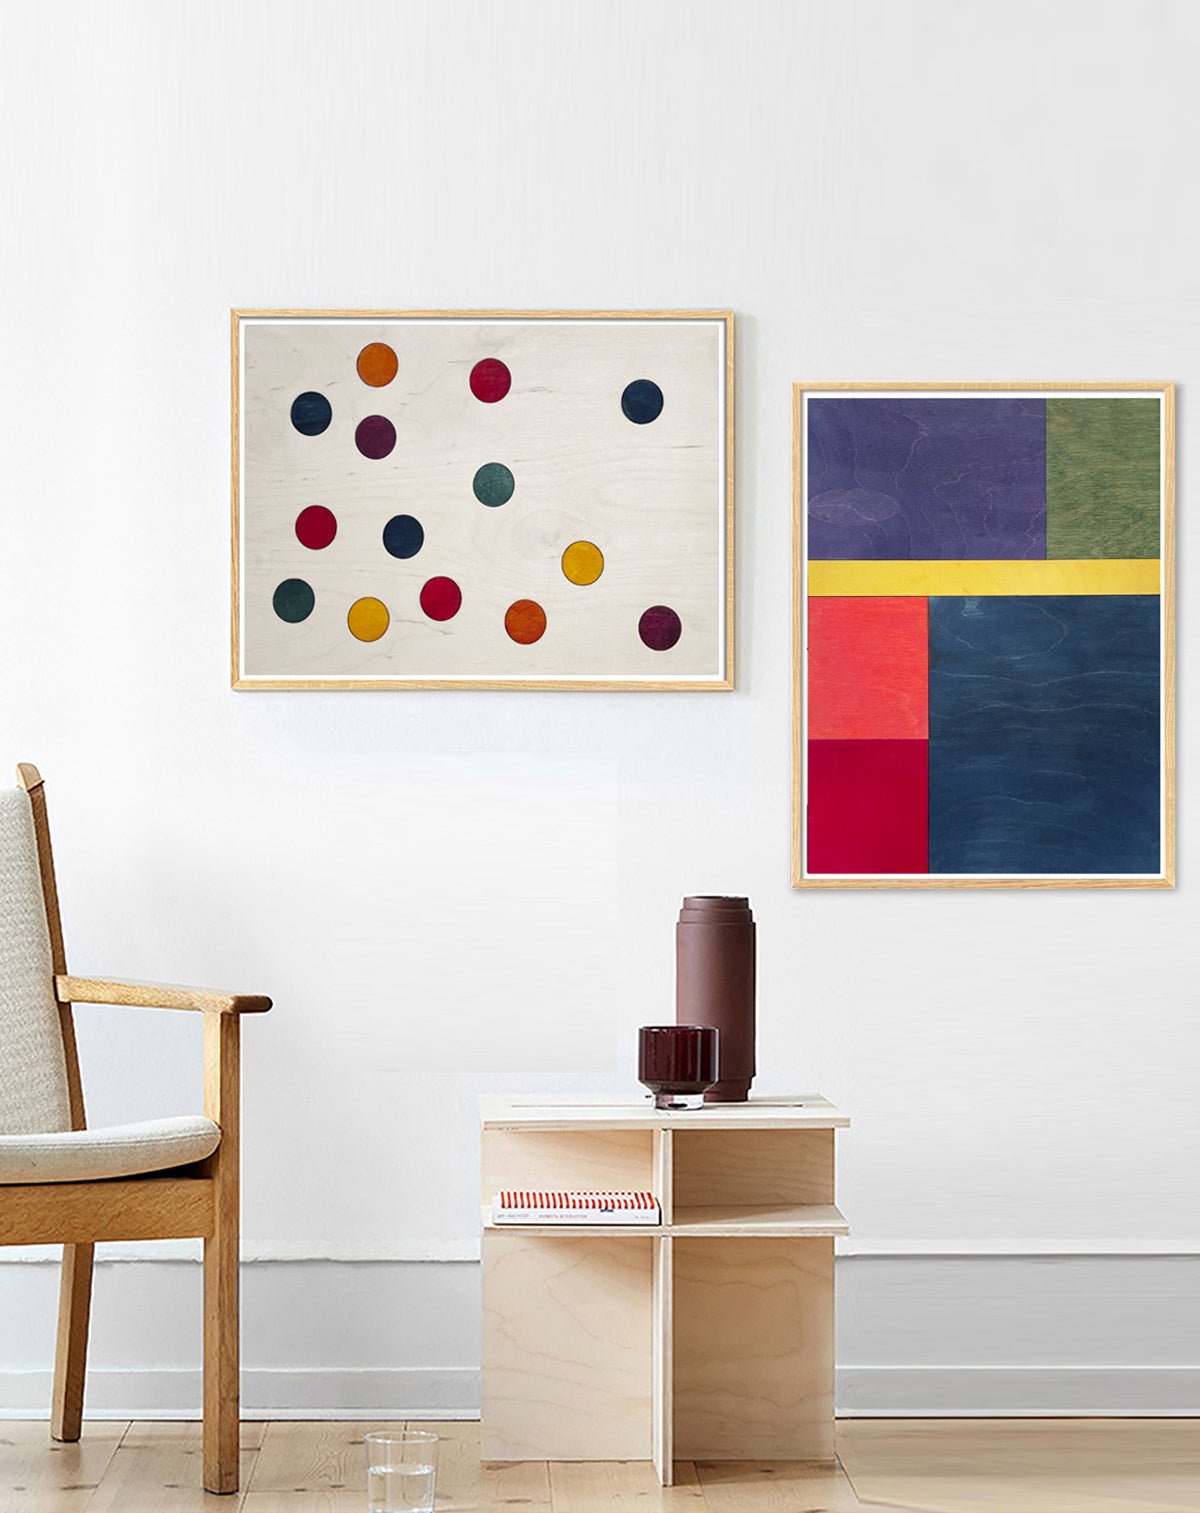 Abstract and graphic art posters with colors of the rainbow to add an artistic touch to the homes interior.